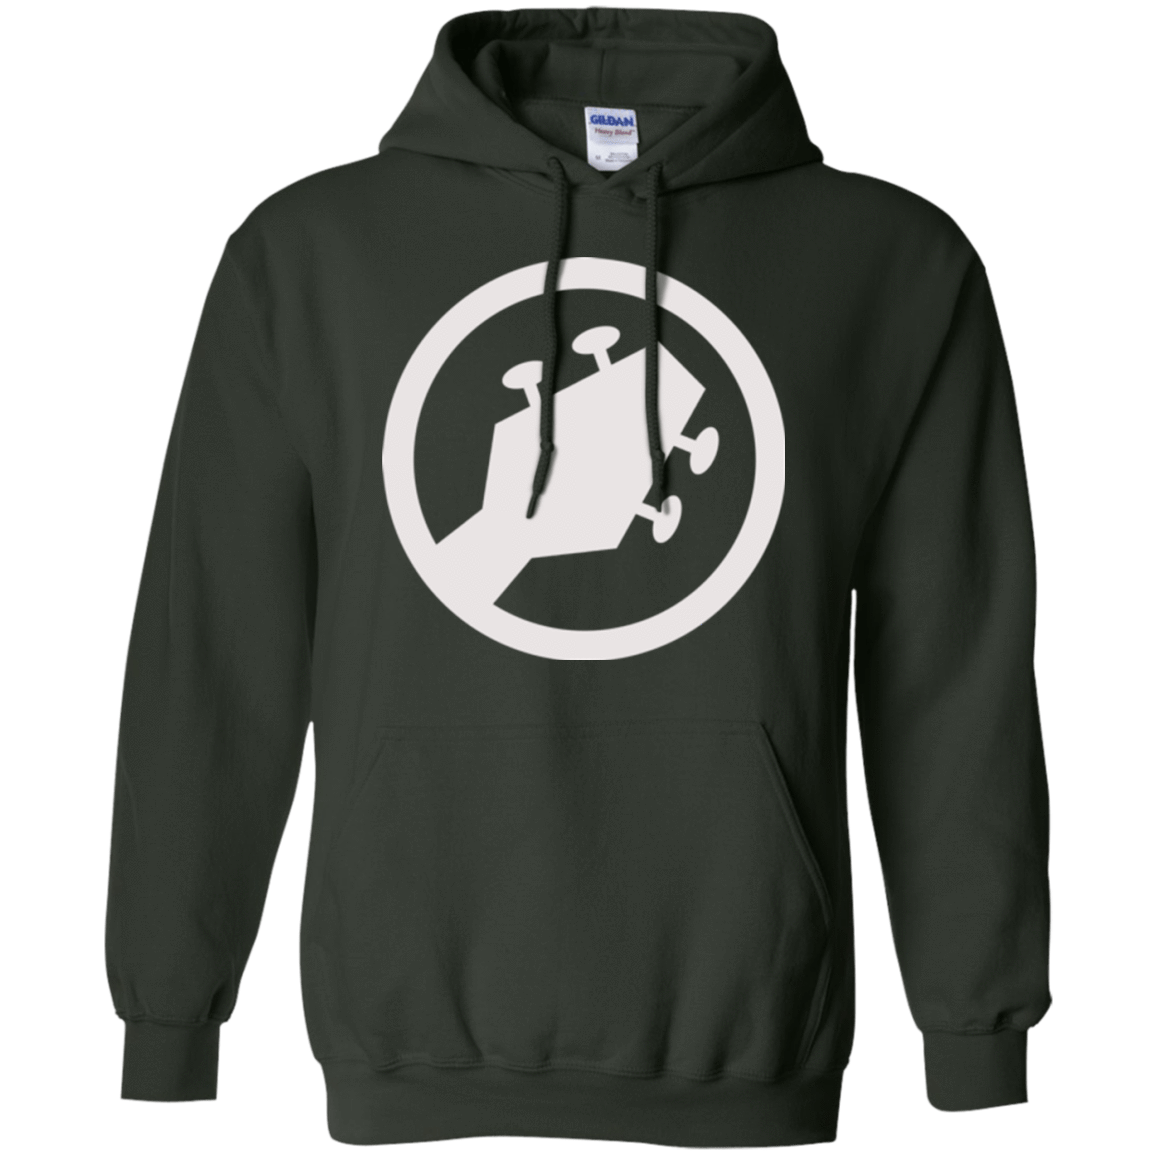 Sweatshirts Forest Green / Small Marceline vs The World Pullover Hoodie